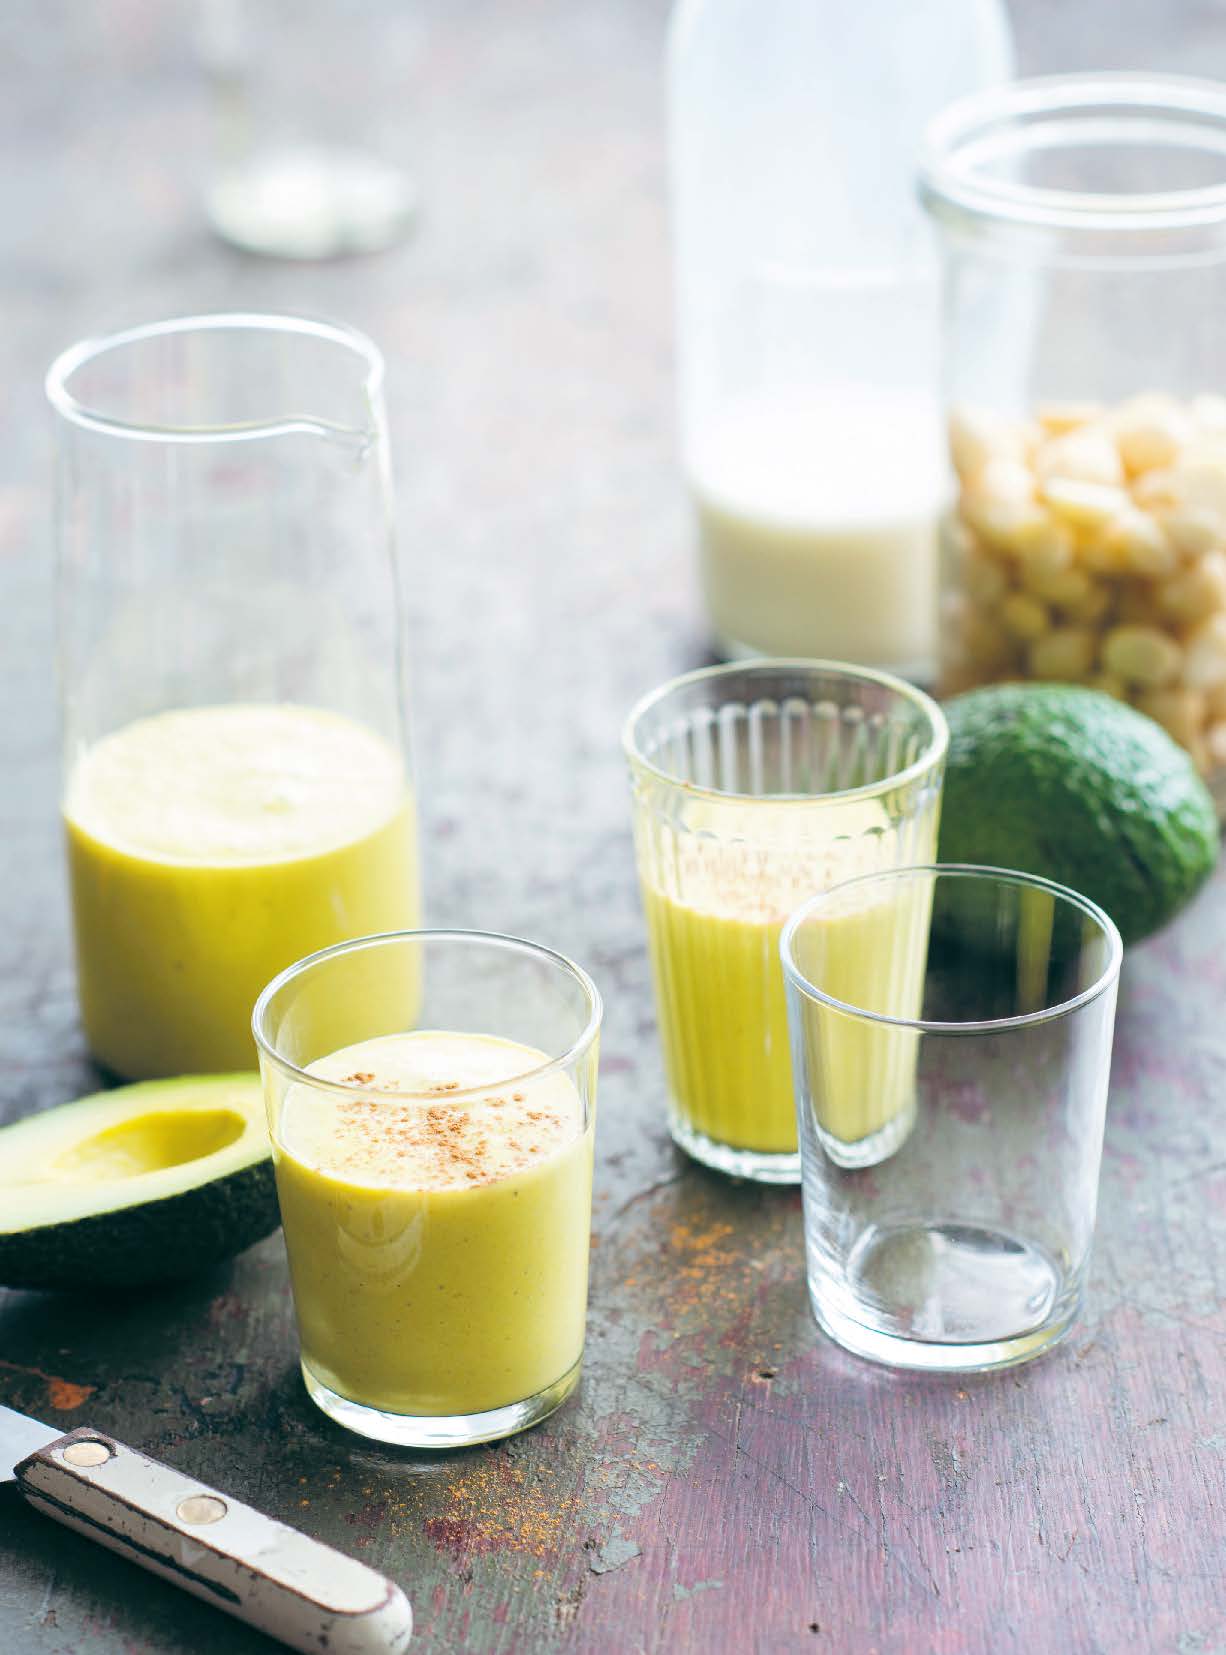 Chilled avocado, turmeric and cashew nut soup